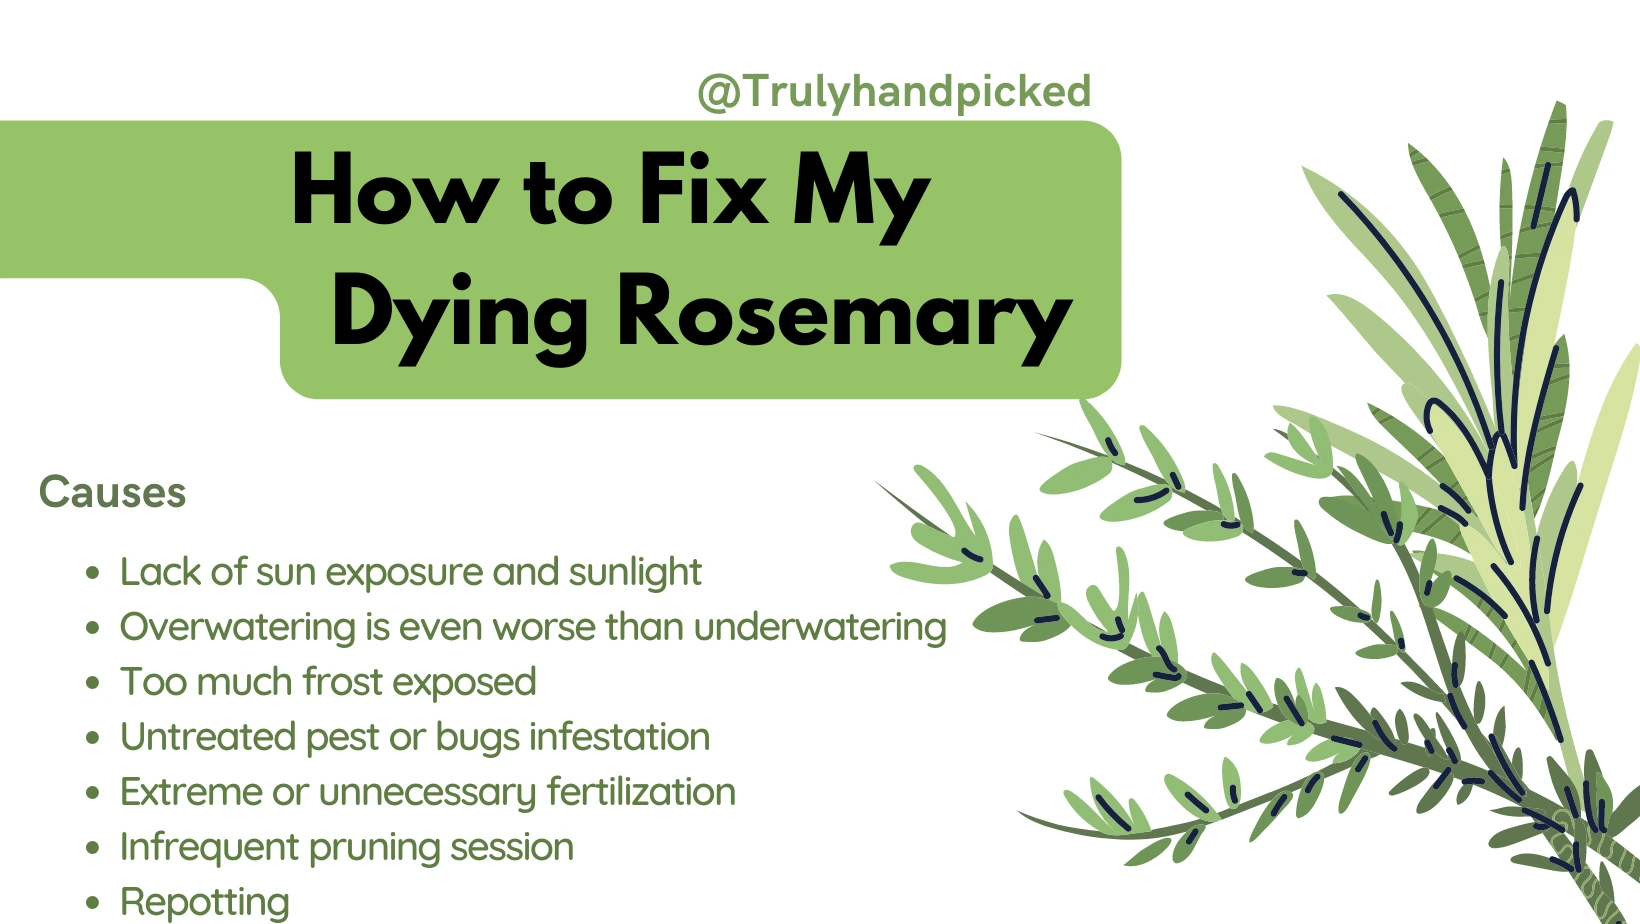 Reasons for a dying rosemary herb plant